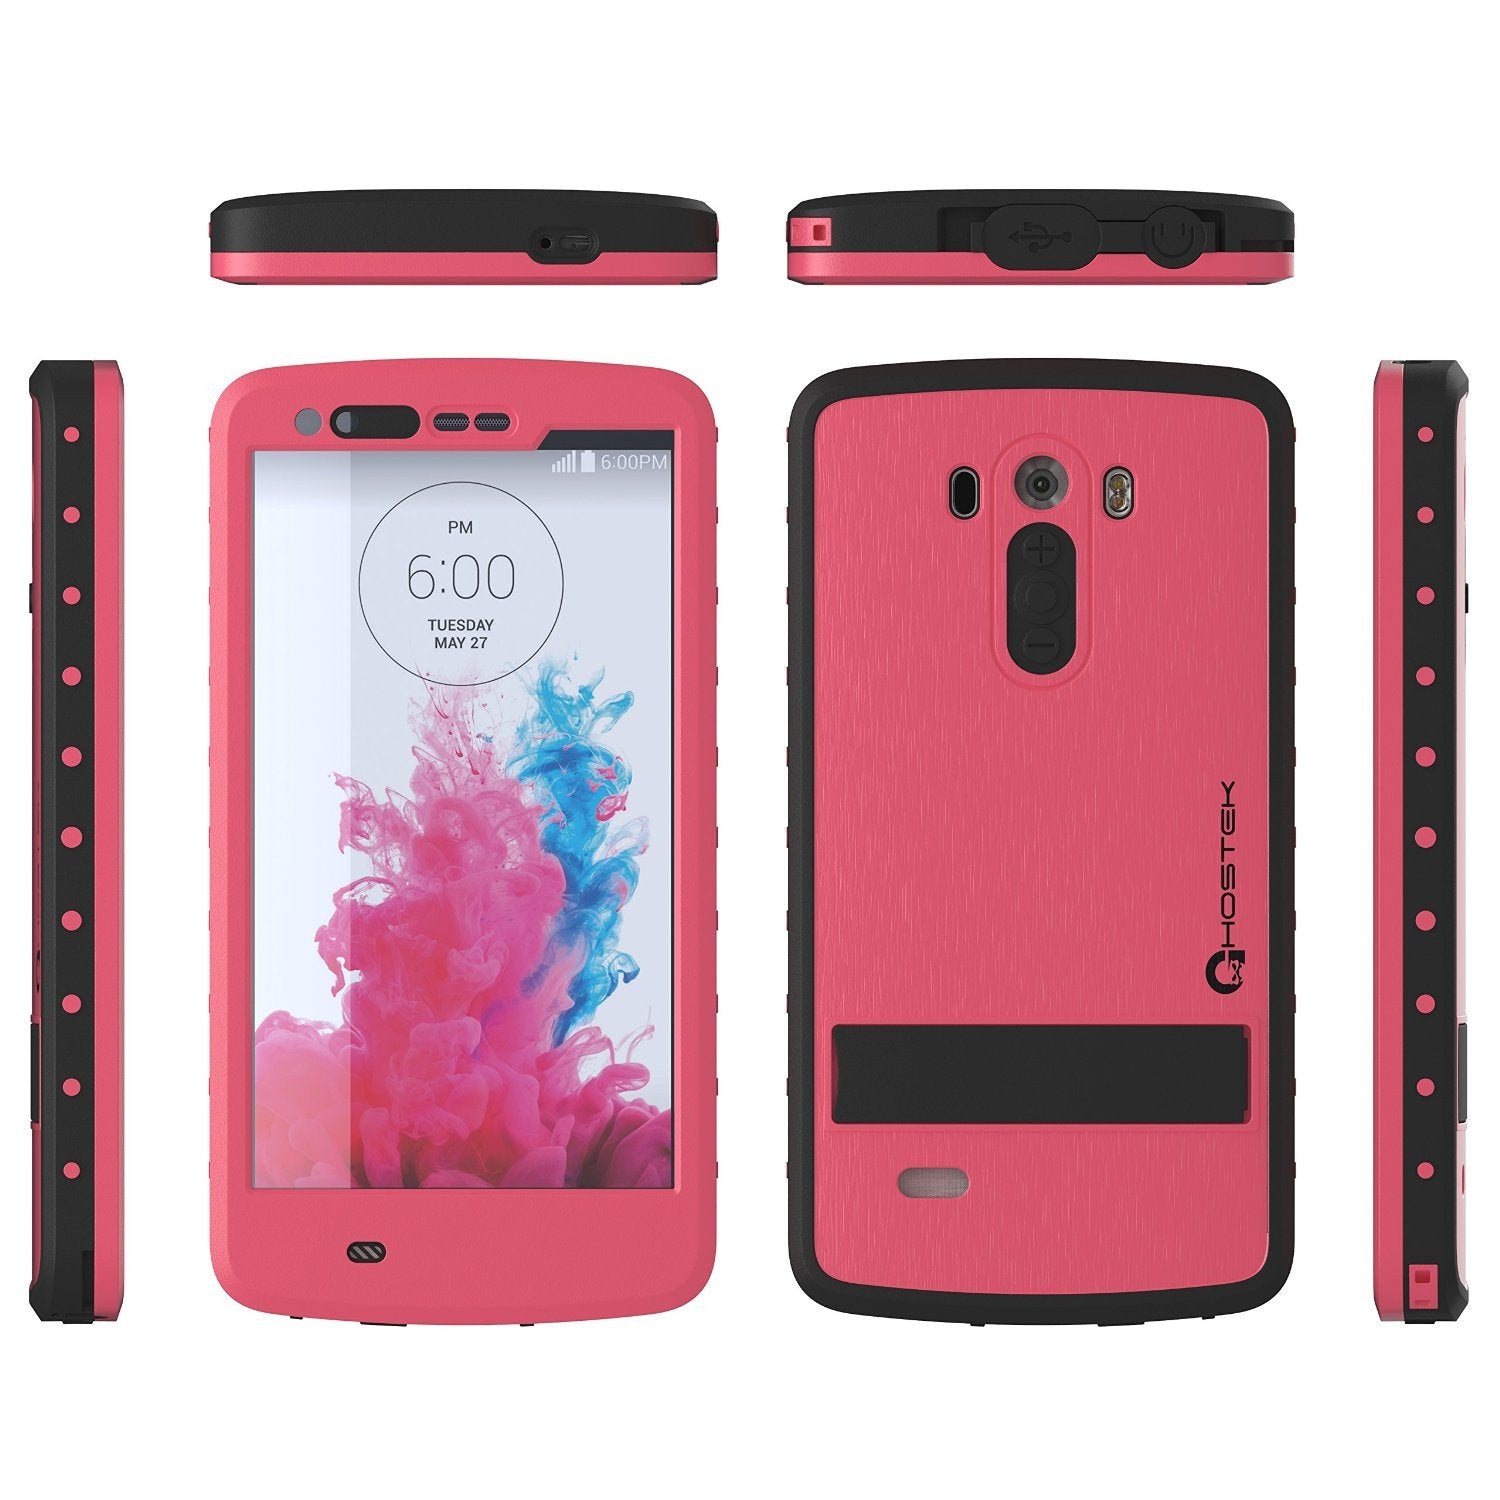 LG G3 Waterproof Case, Ghostek Atomic Pink W/ Attached Screen Protector Slim Fitted  LG G3